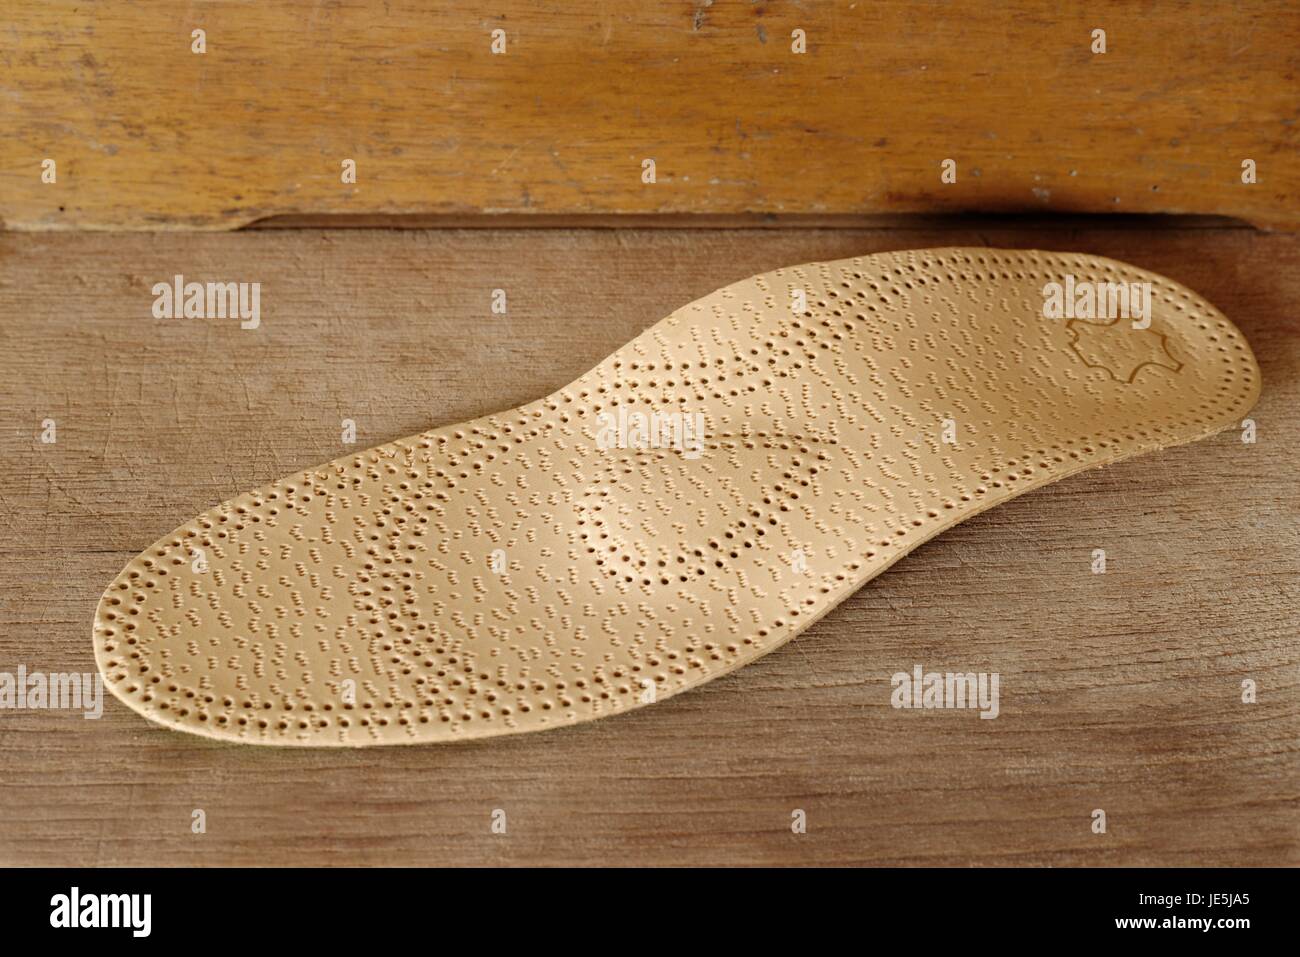 Orthopedic arch support made from leather on a wooden ground Stock Photo